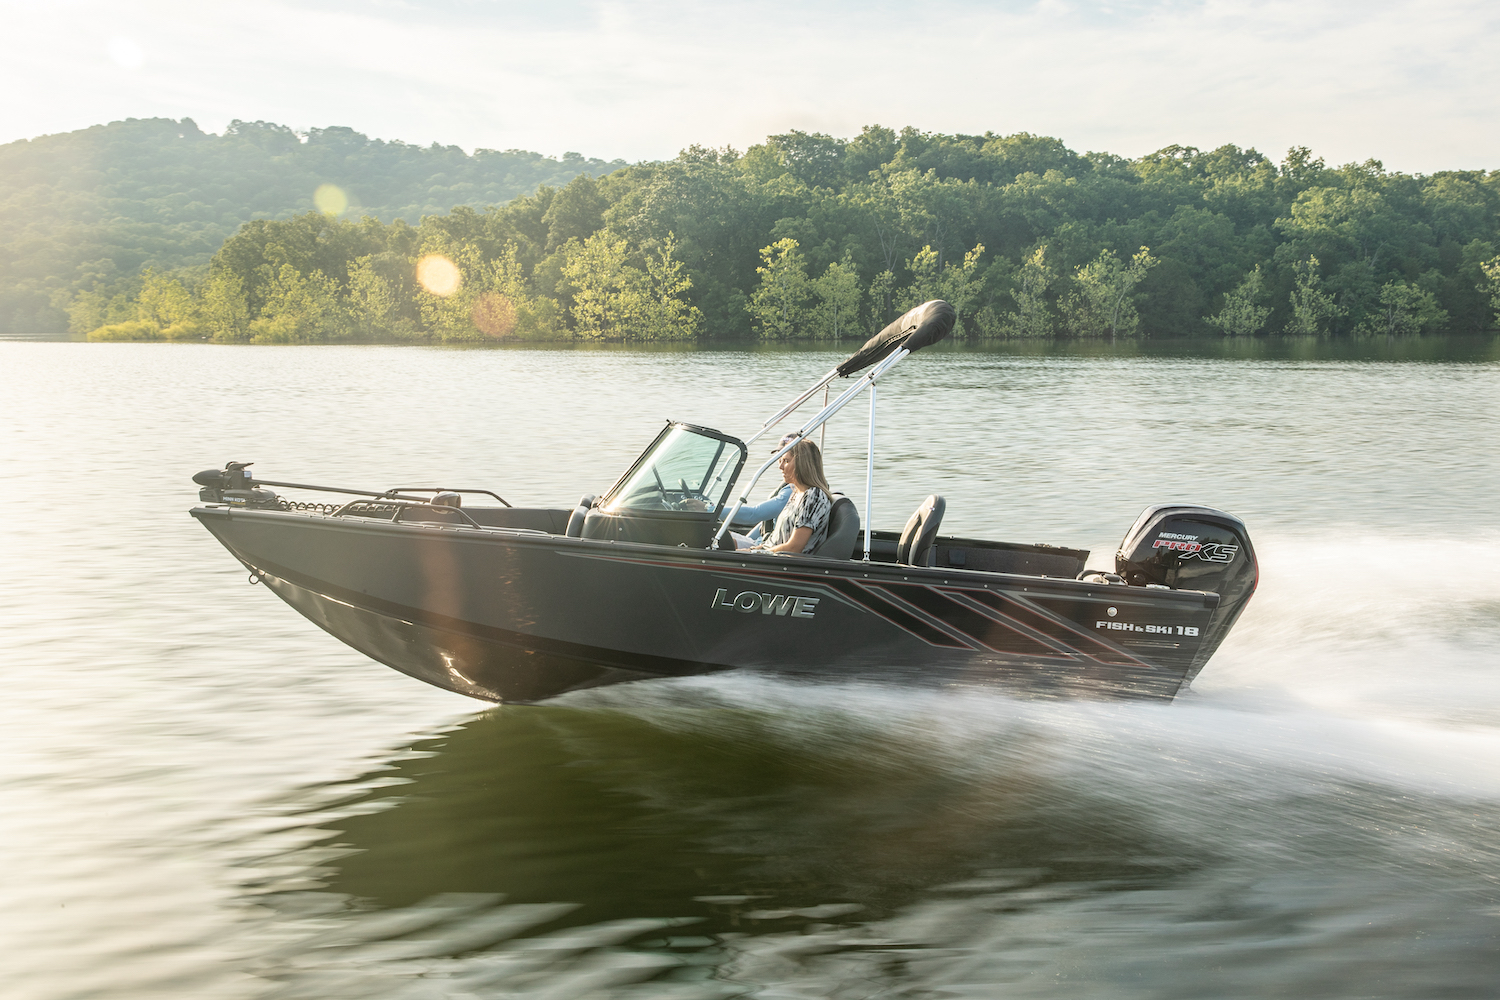 A Lowe FS 1800 on the water, the Lowe FS 1800 is an affordable new boat under $30,000